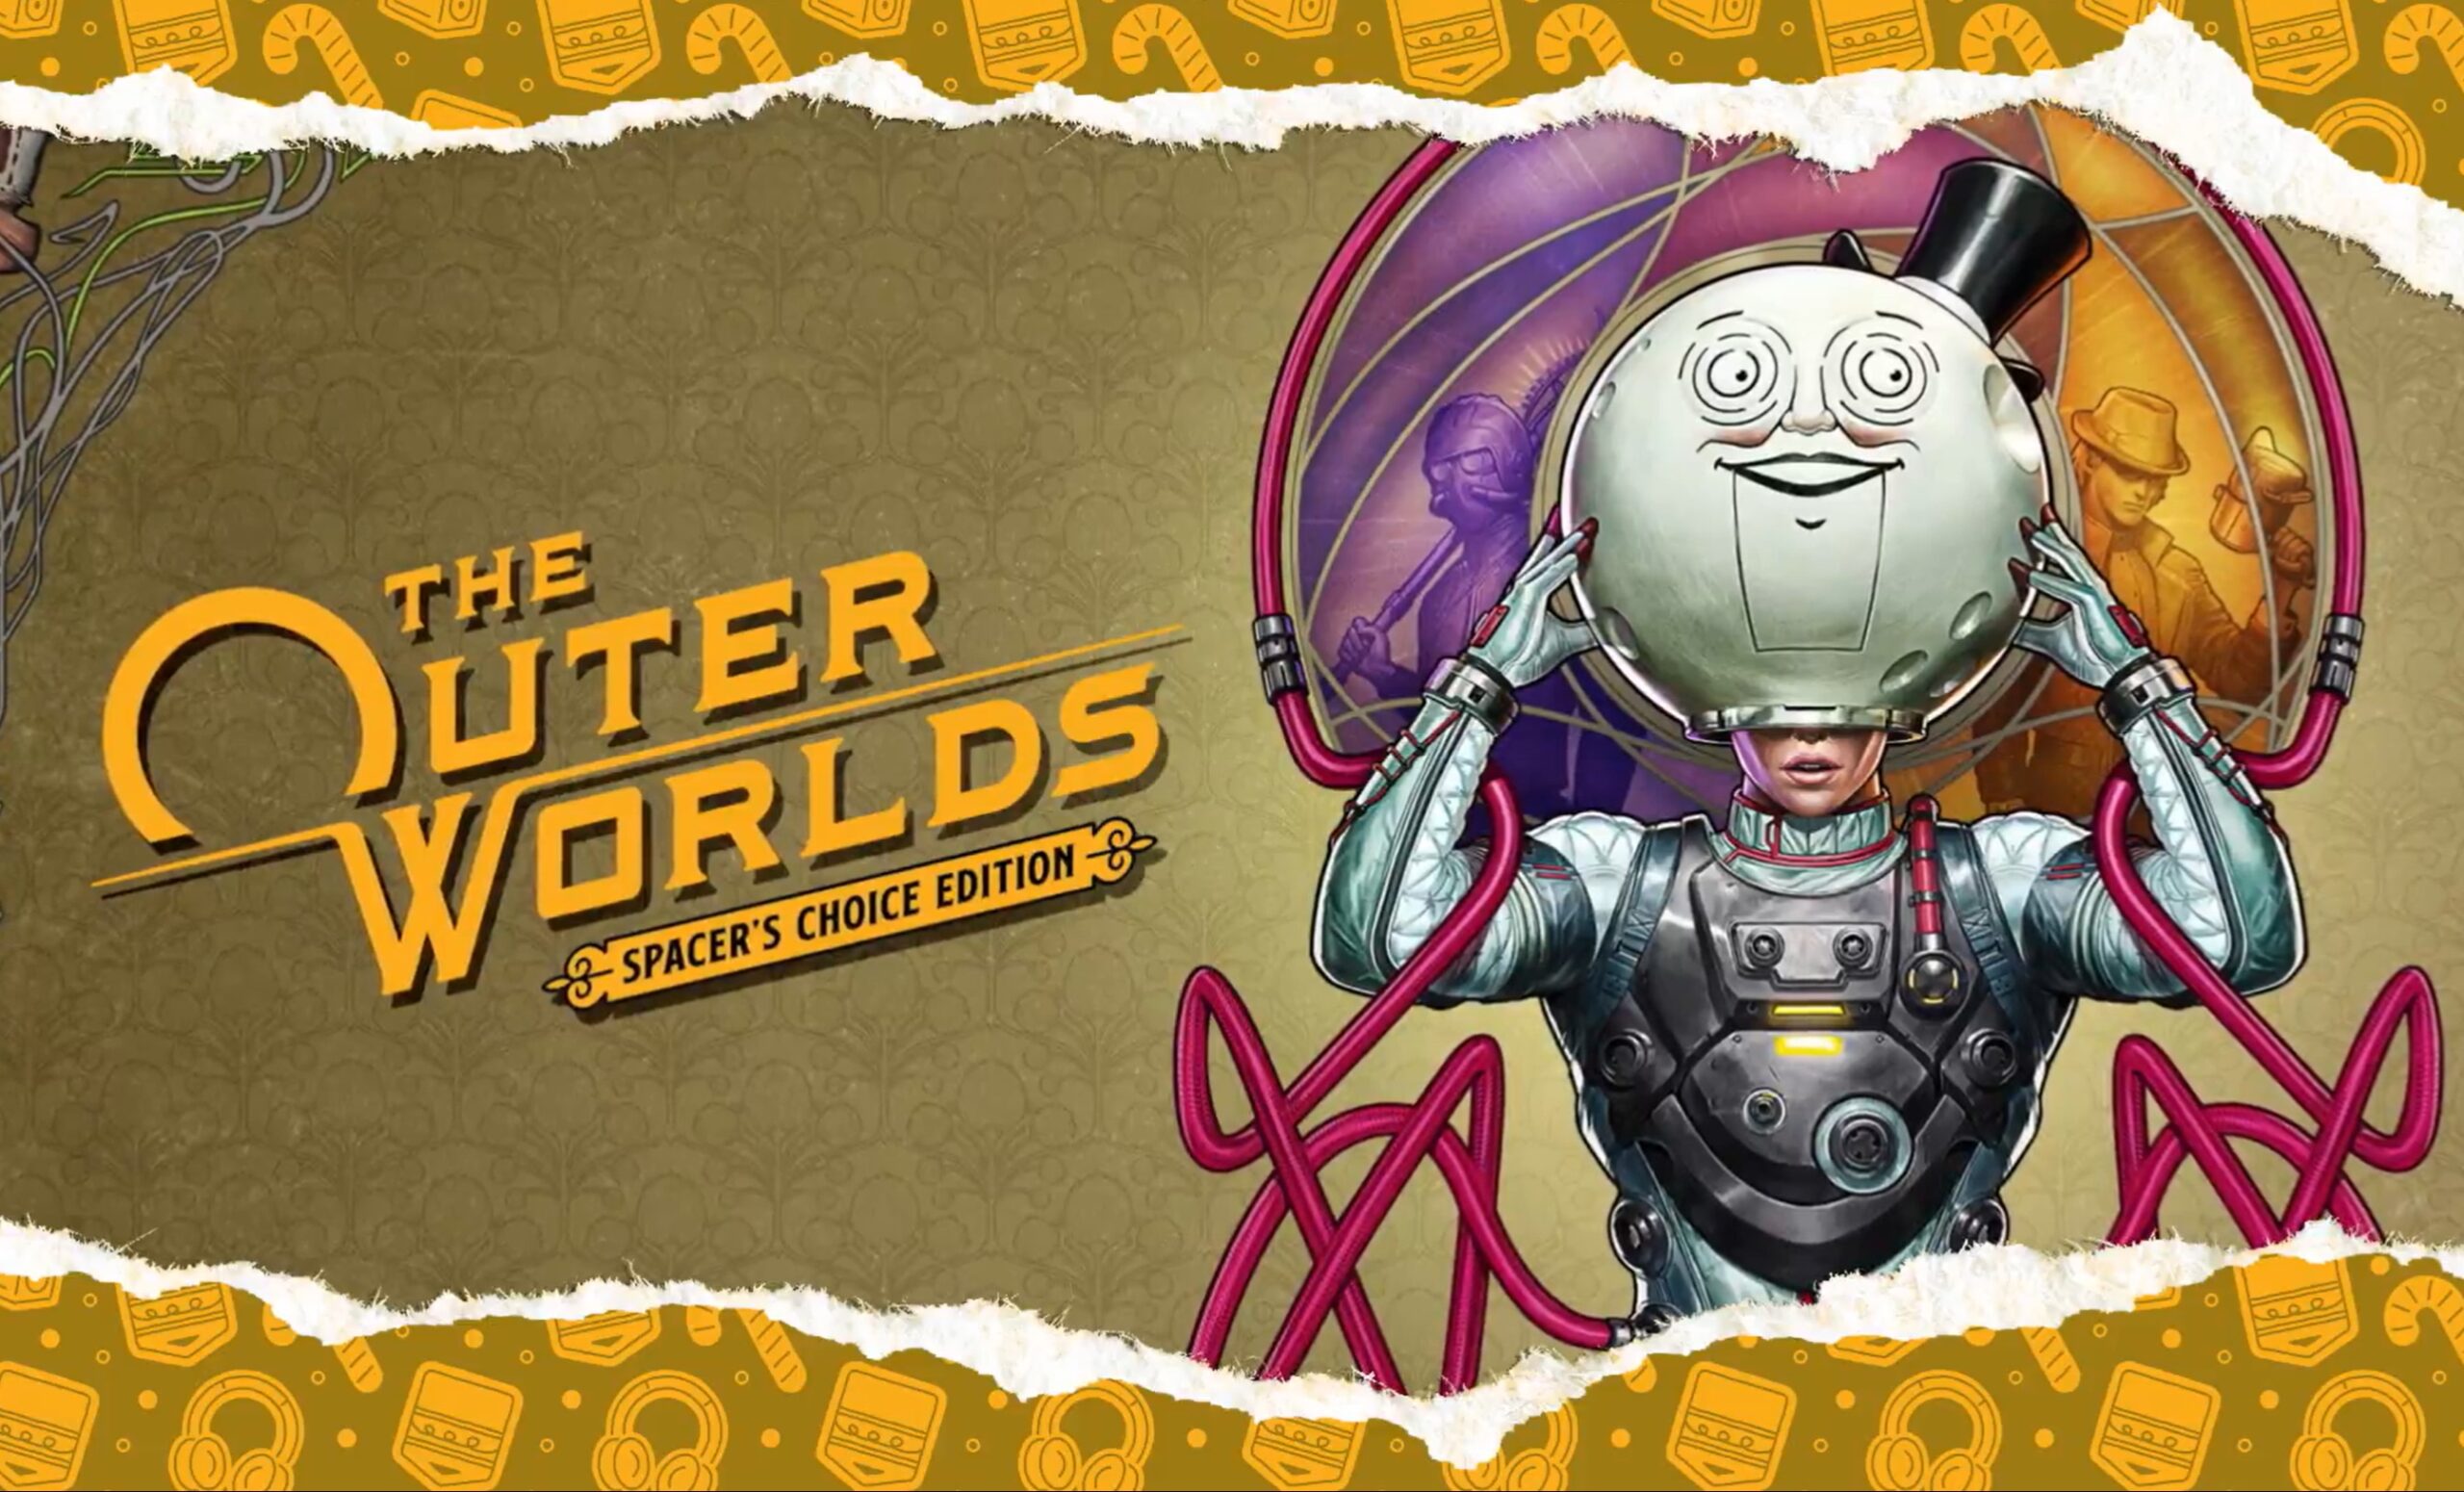 The Outer Worlds is currently available for free on the Epic Games Store